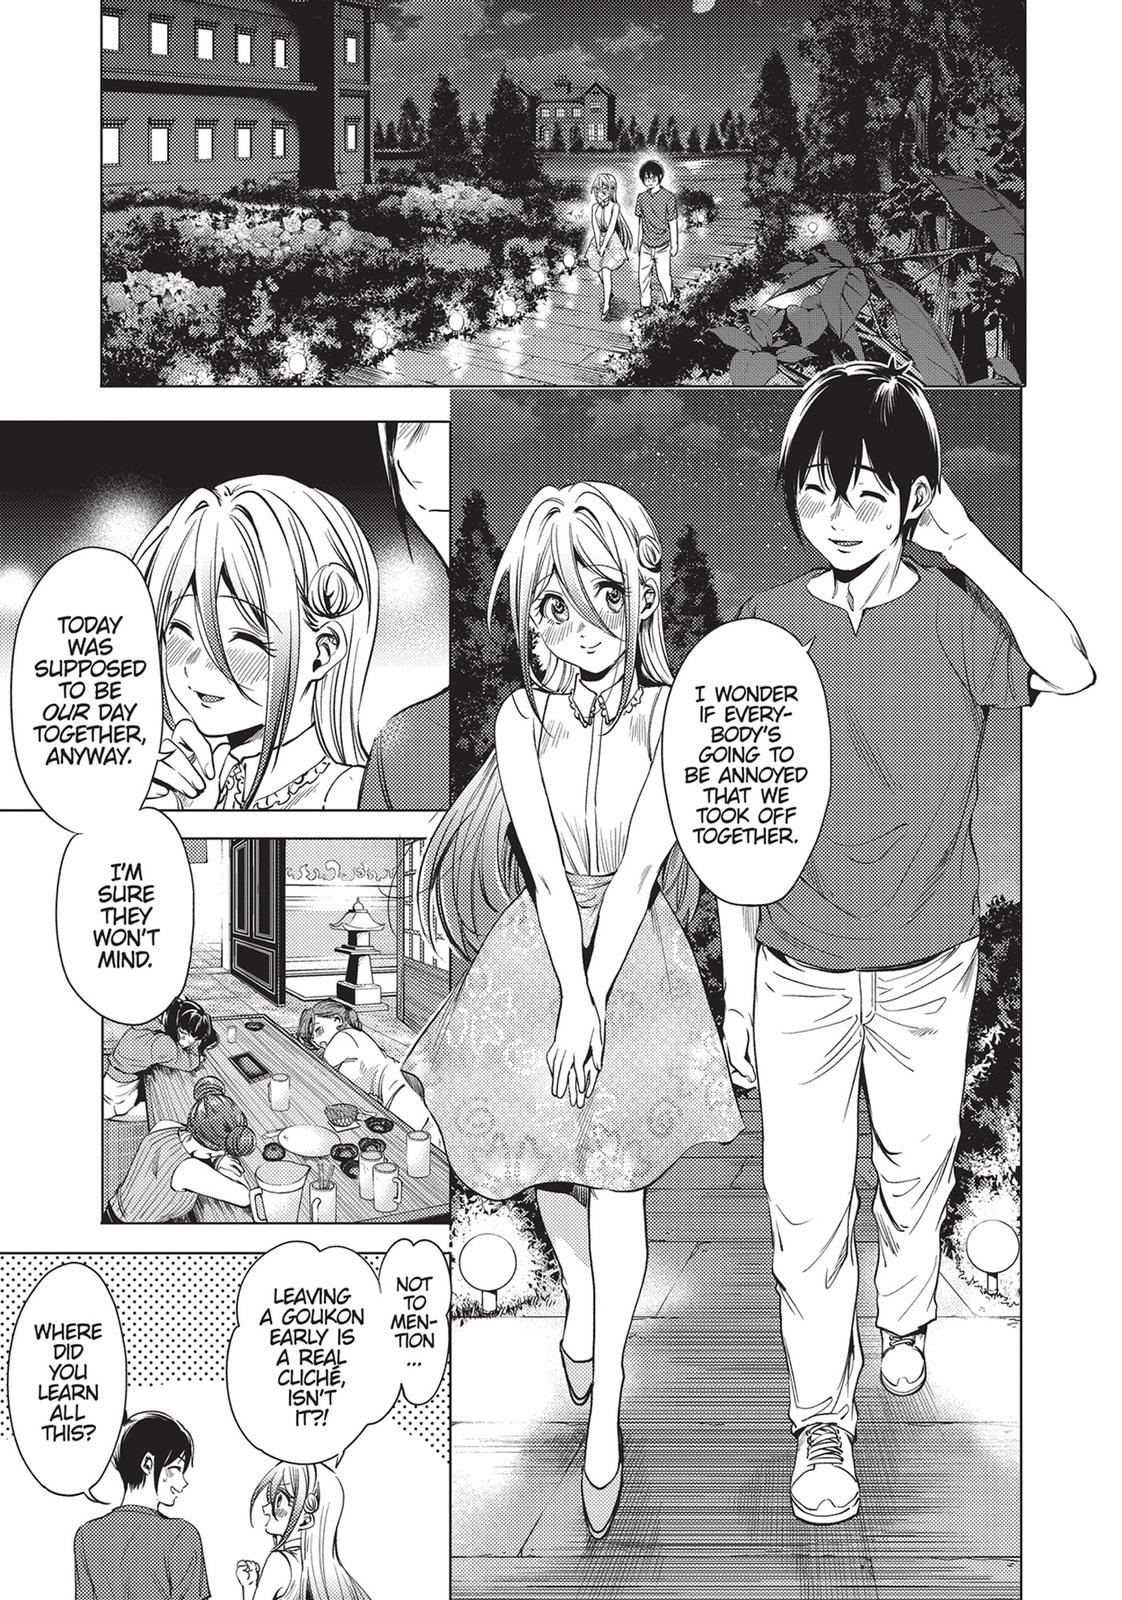 World's End Harem, Chapter 73  TcbScans Net - TCBscans - Free Manga Online  in High Quality